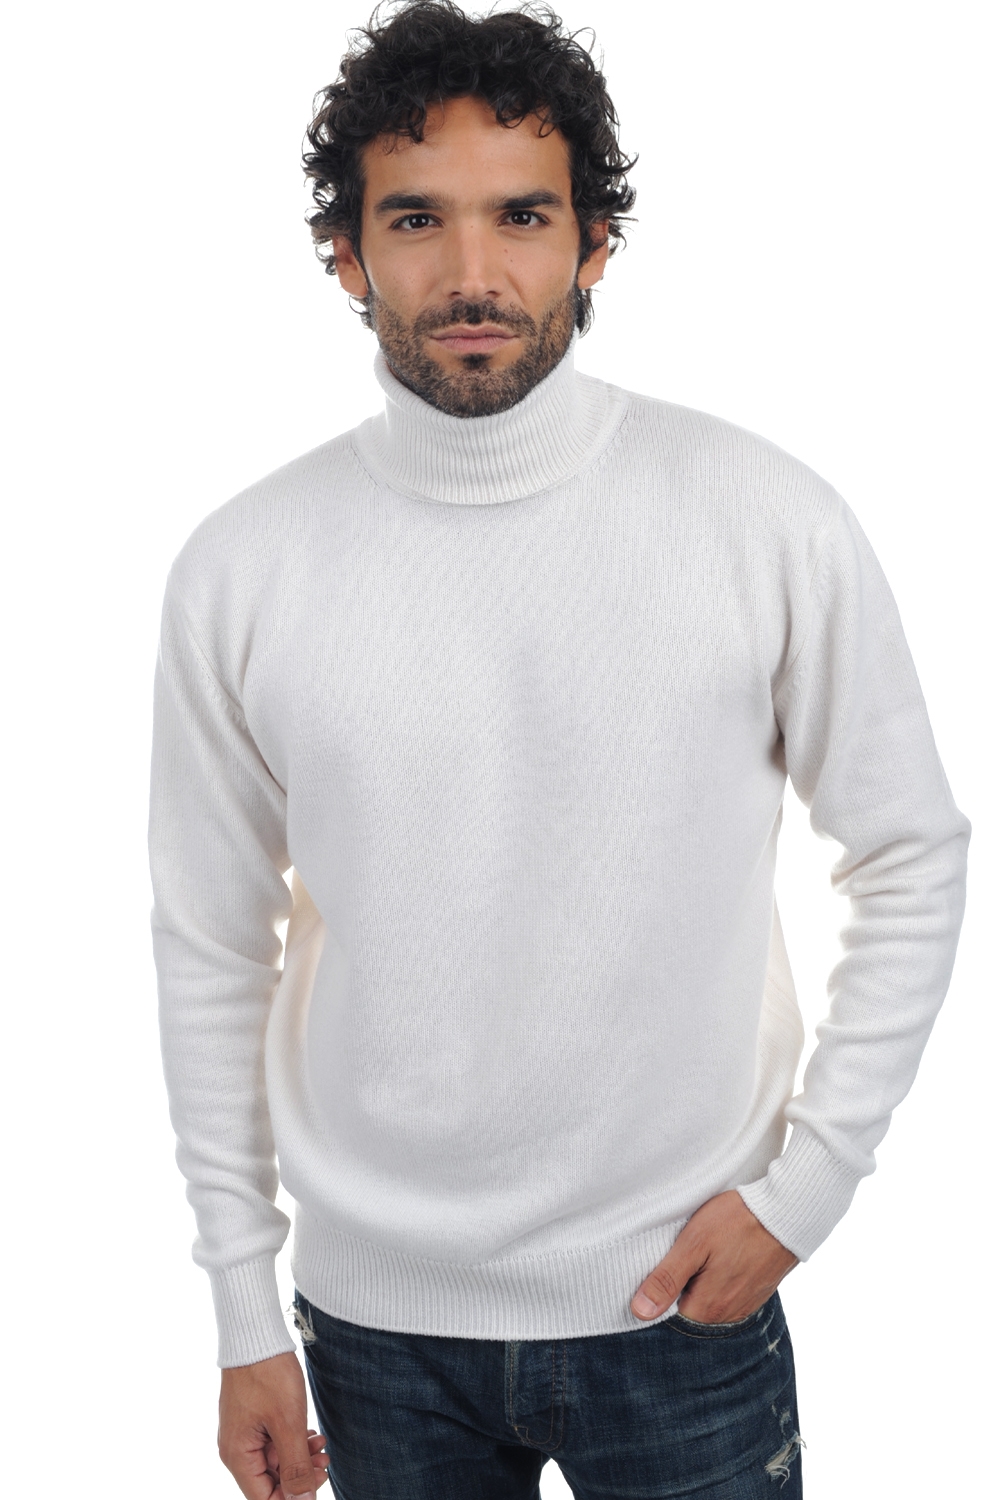 Cachemire pull homme col roule edgar 4f blanc casse s